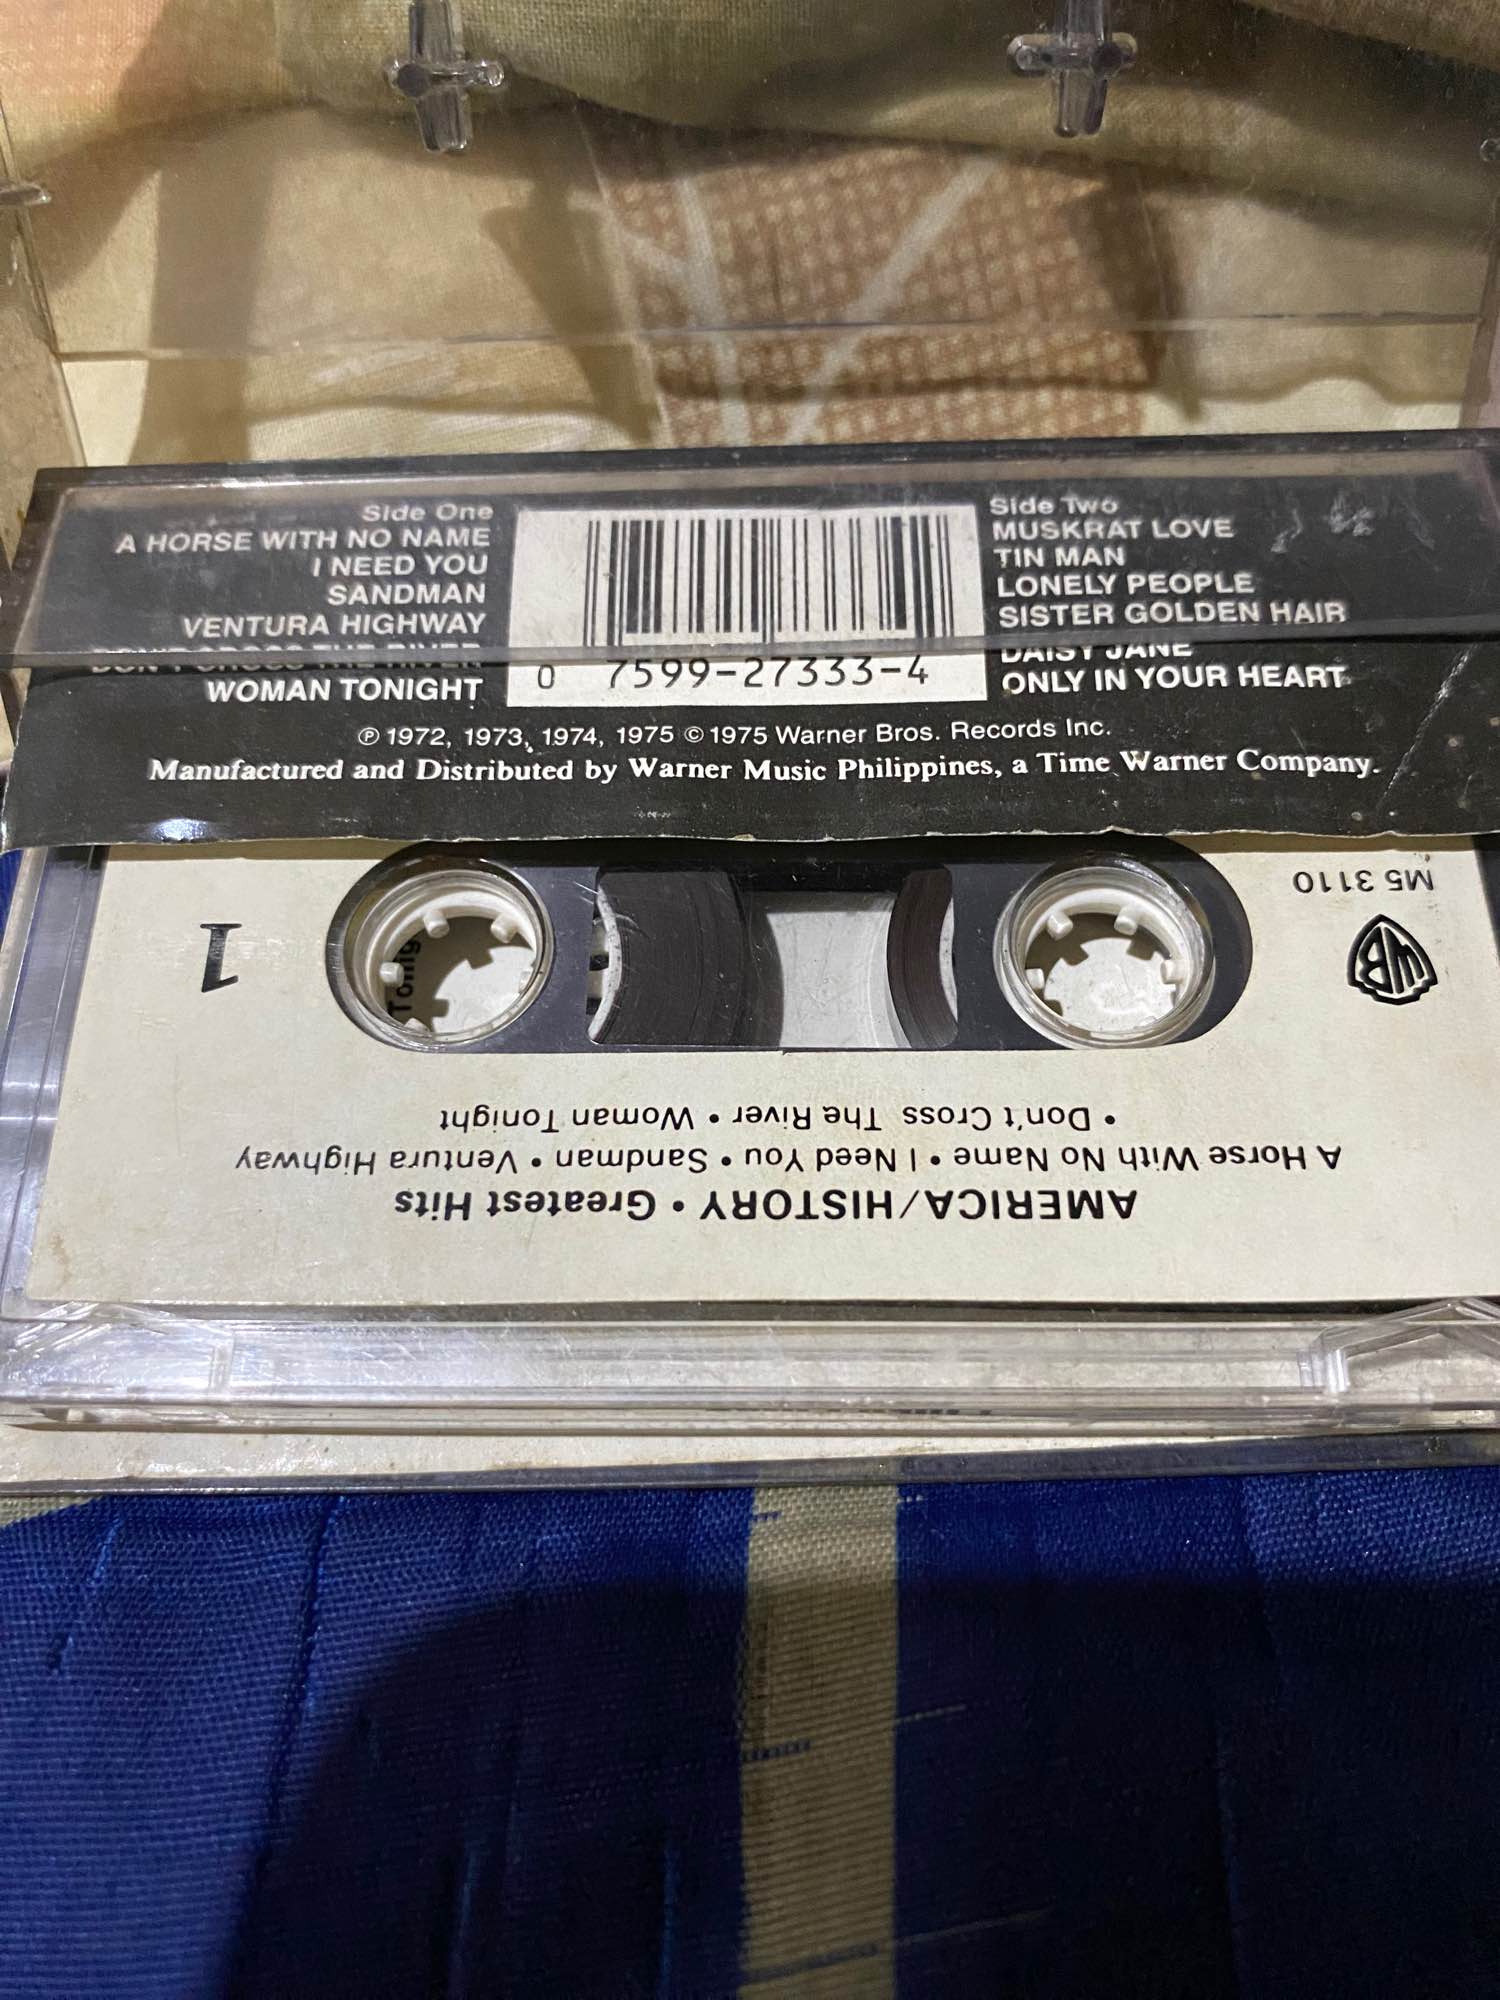 Moments In Love. (1992, Cassette) - Discogs